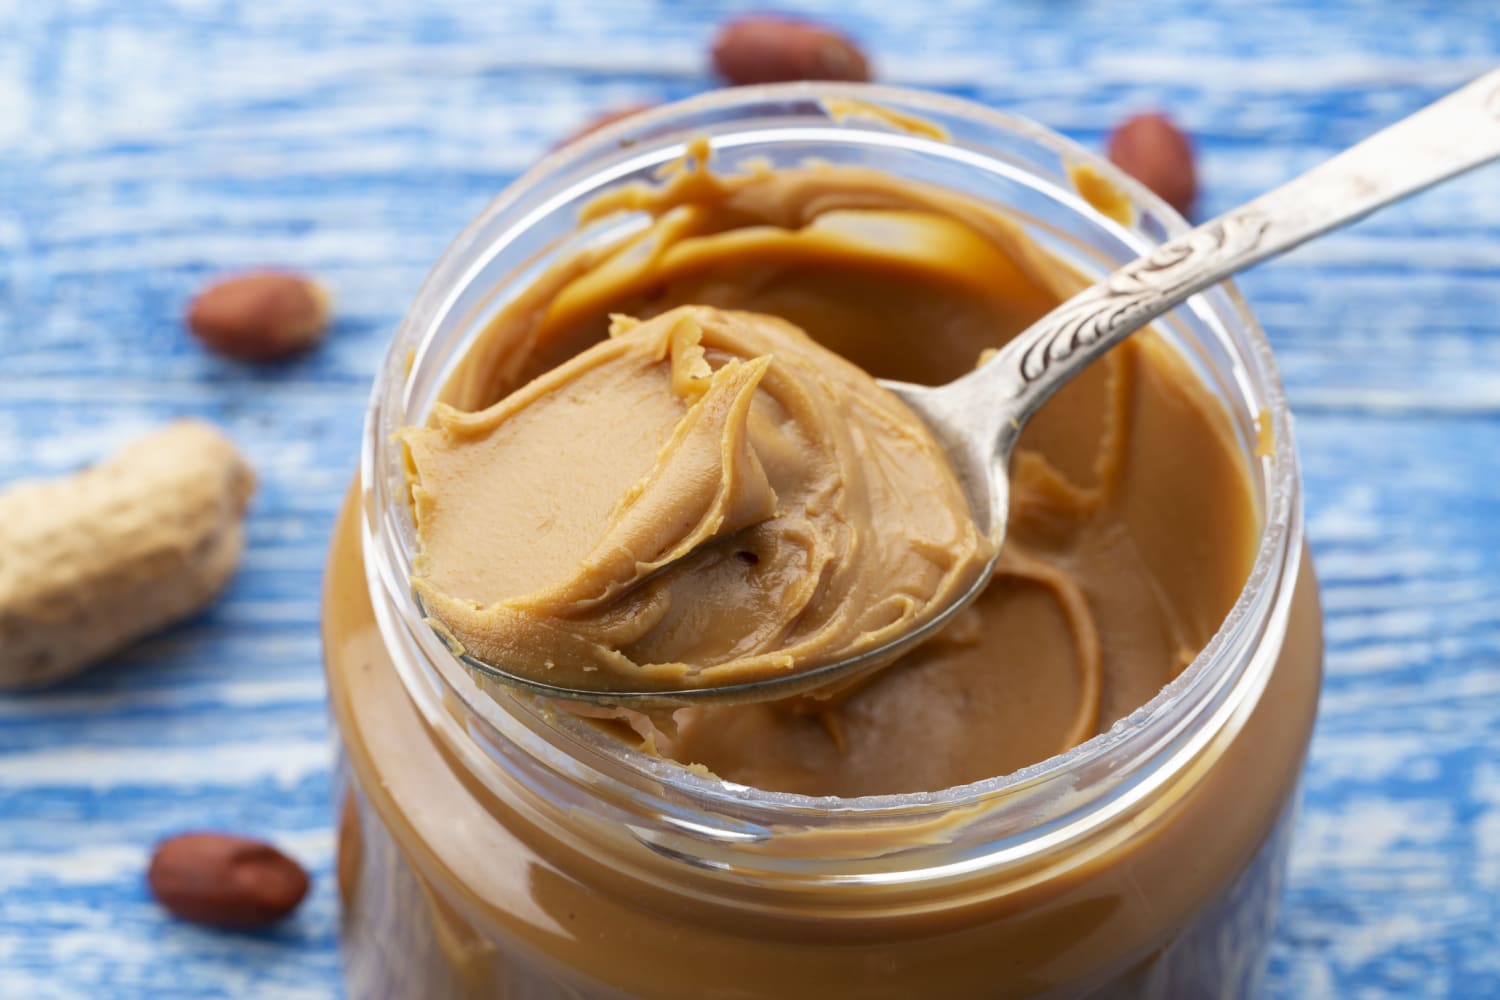 Which type of peanut butter is healthiest? Dietitians share the No. 1 trait to look for